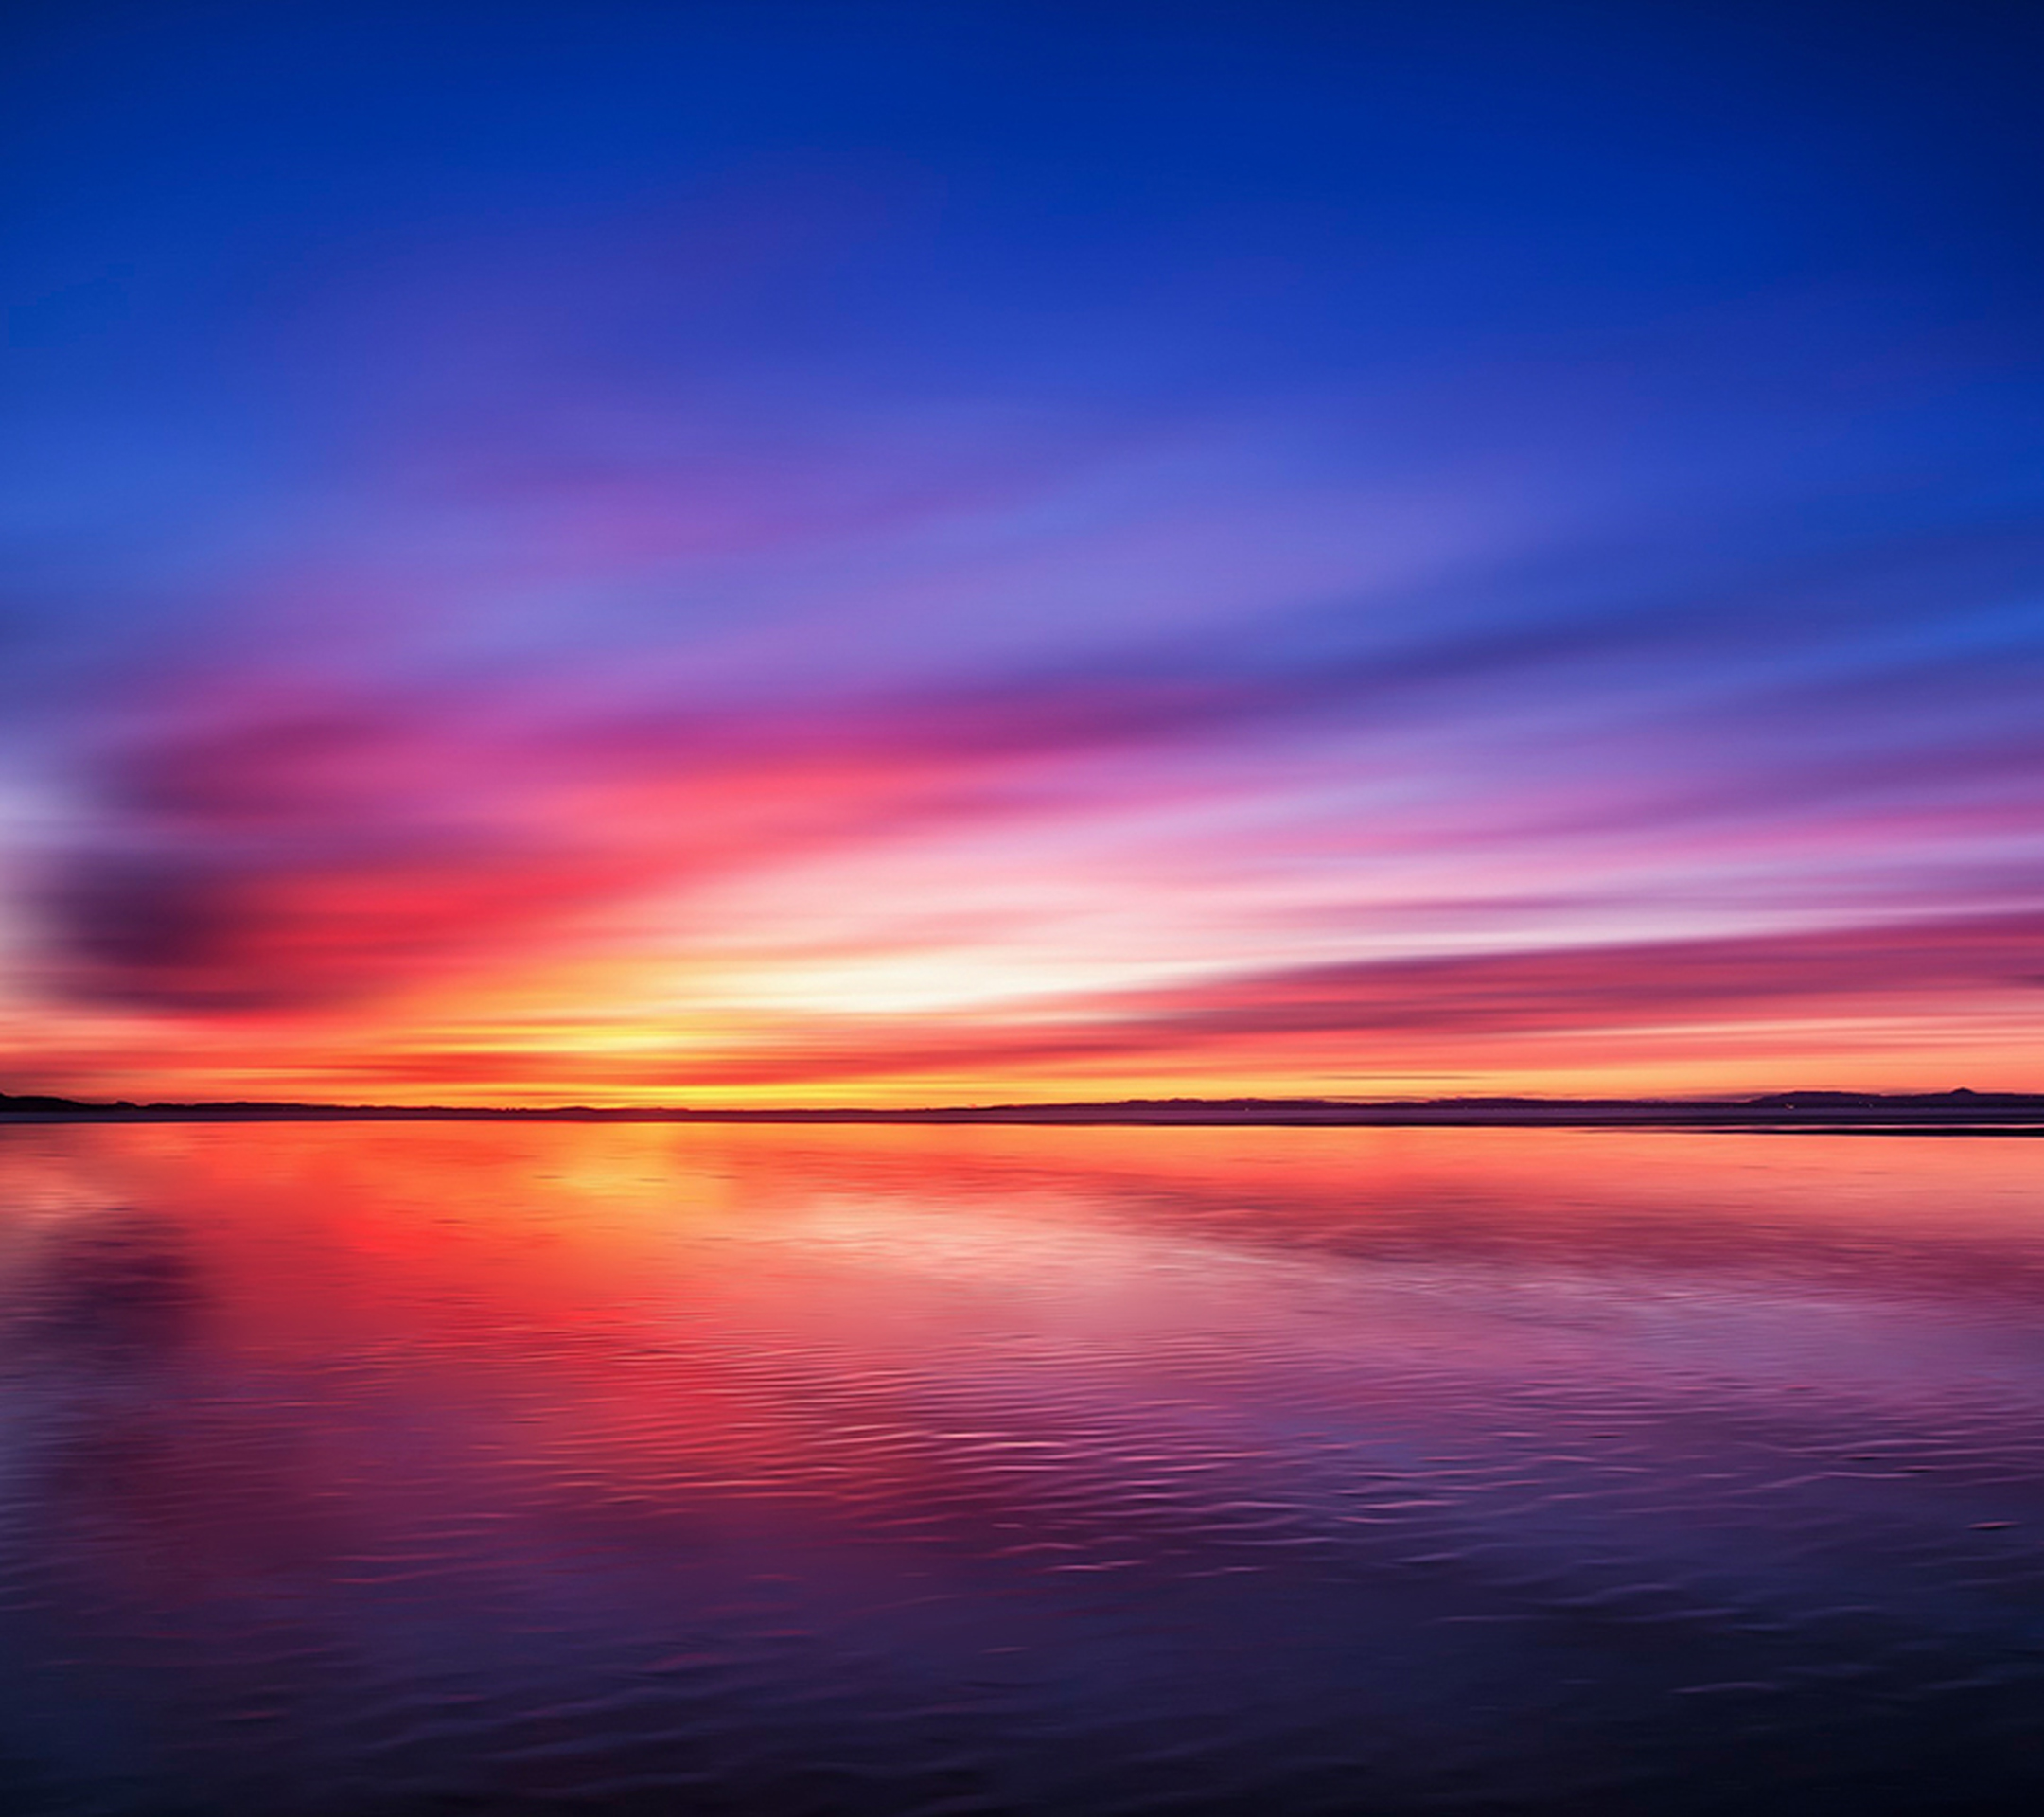 hd stock wallpapers,sky,horizon,afterglow,nature,red sky at morning